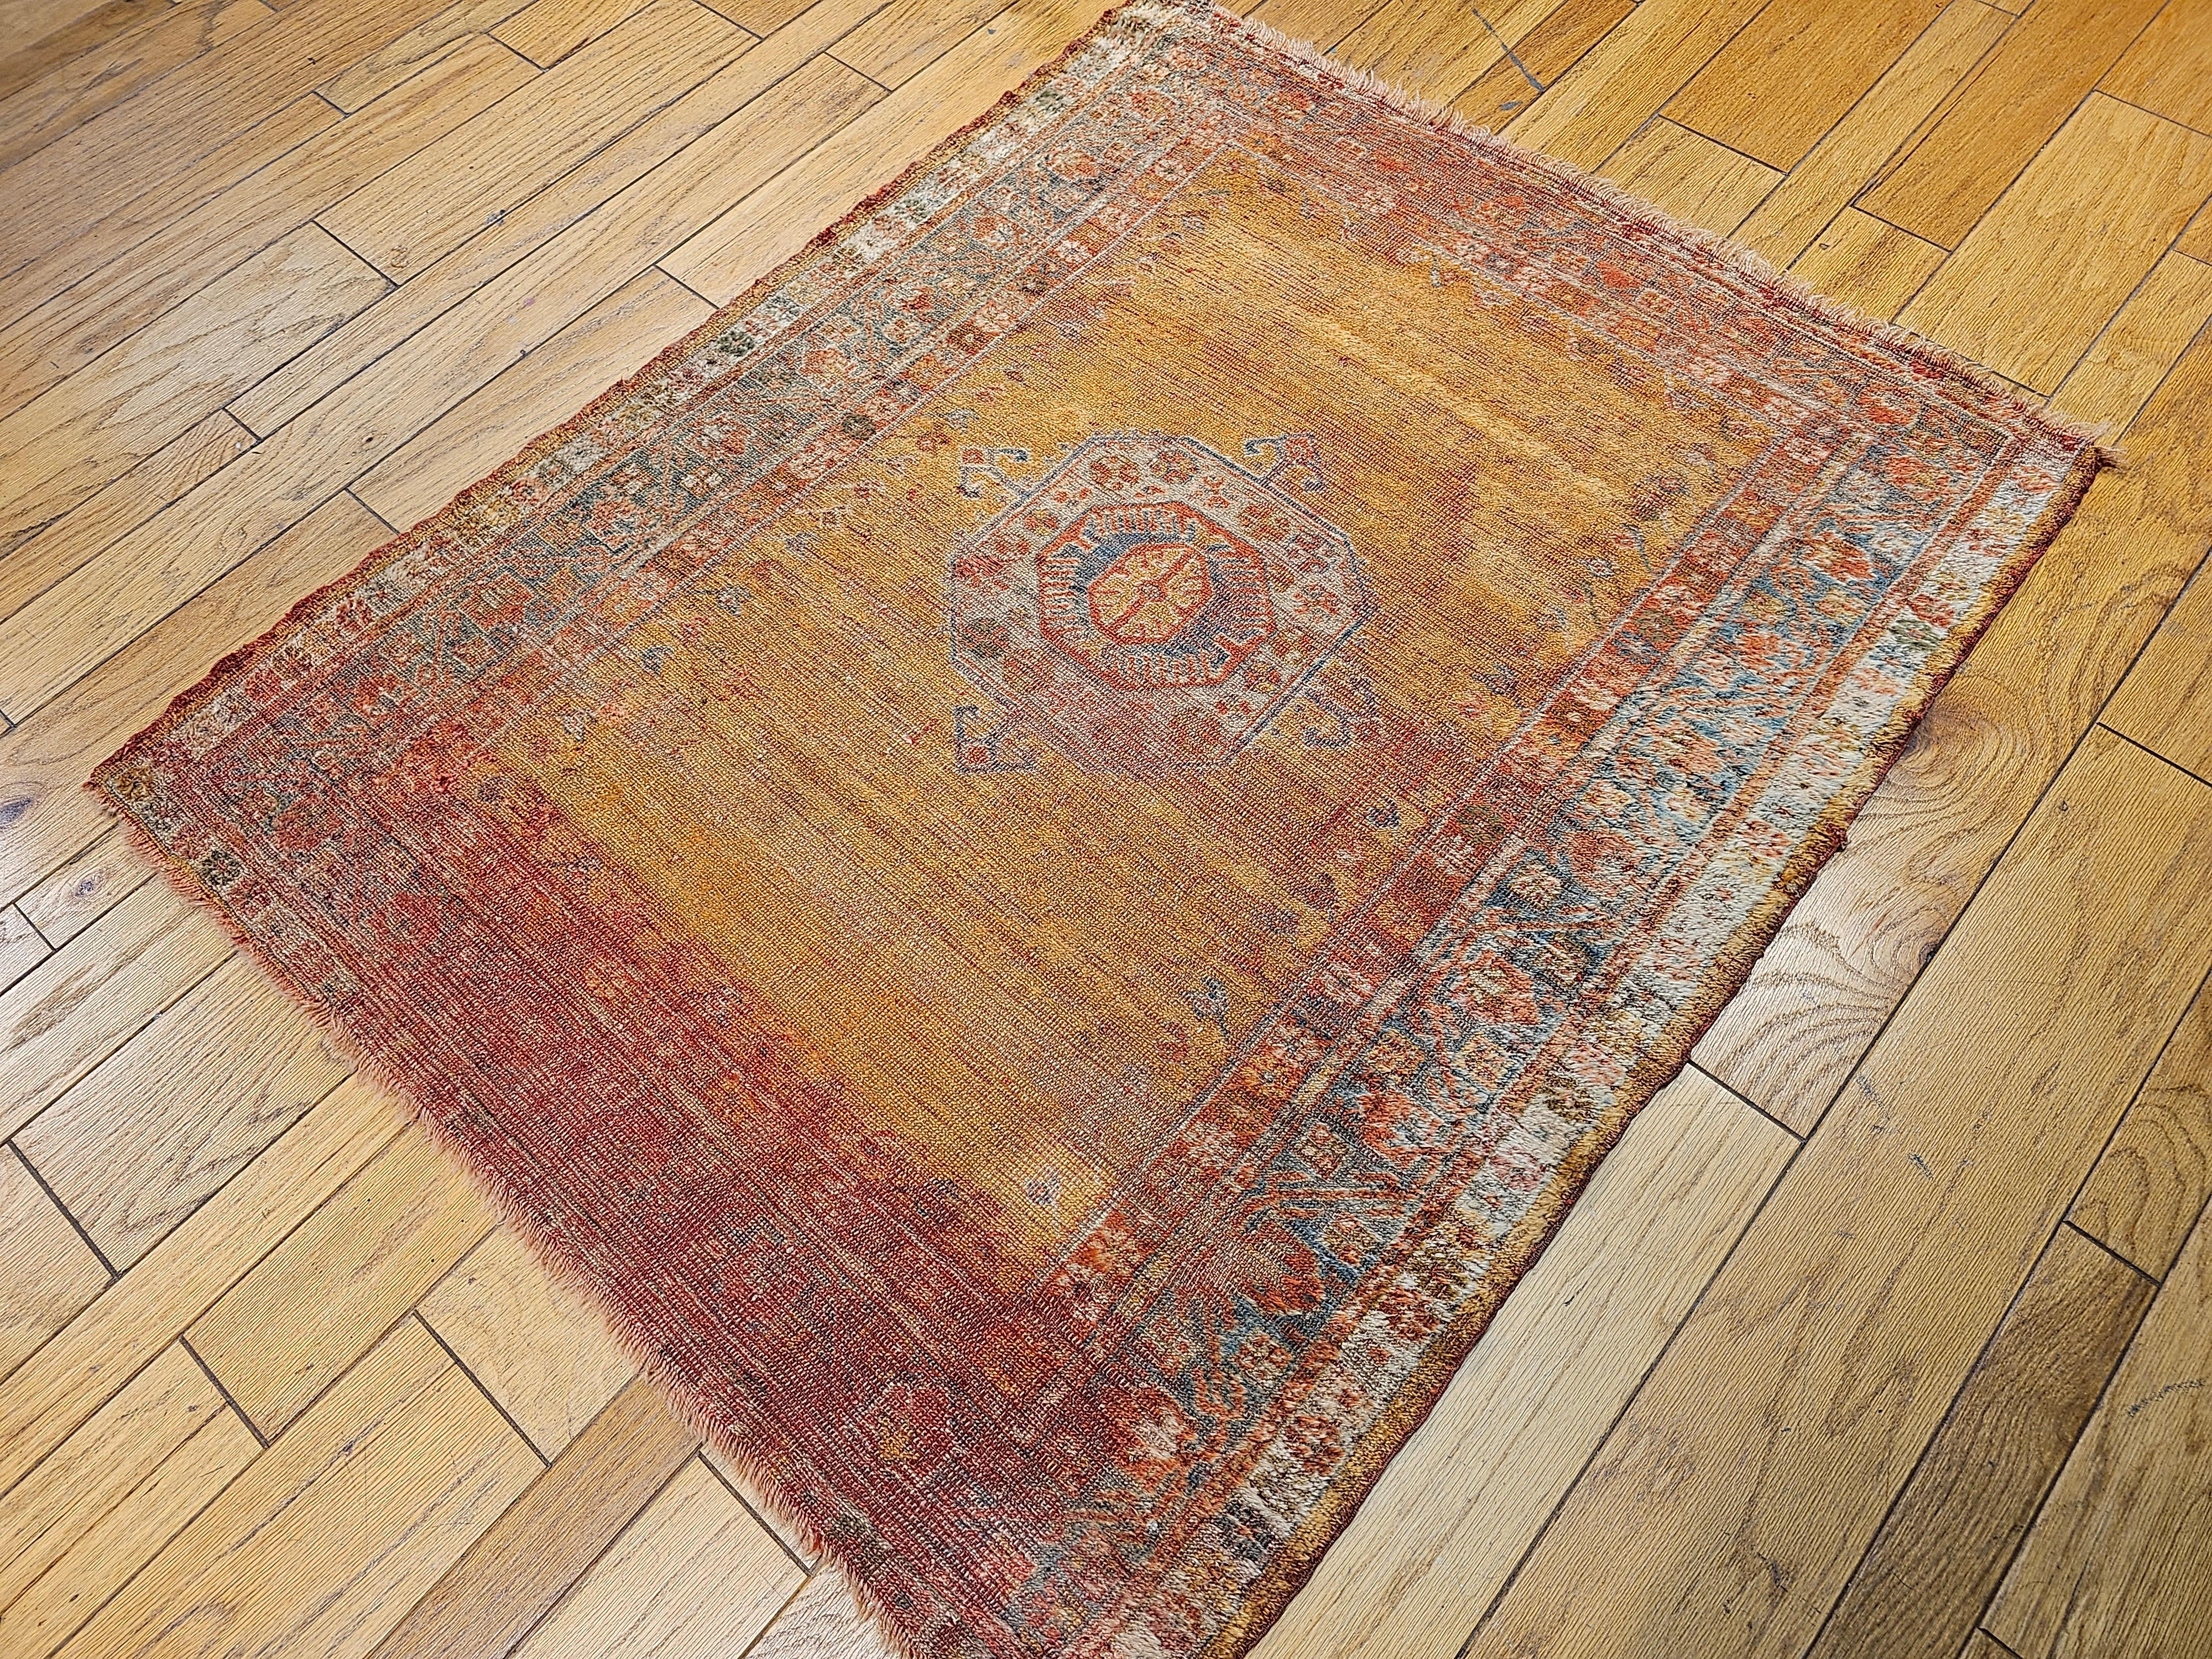 Late 19th Century Turkish Oushak Area Rug in Mamluk Pattern in Saffron, Teal For Sale 7